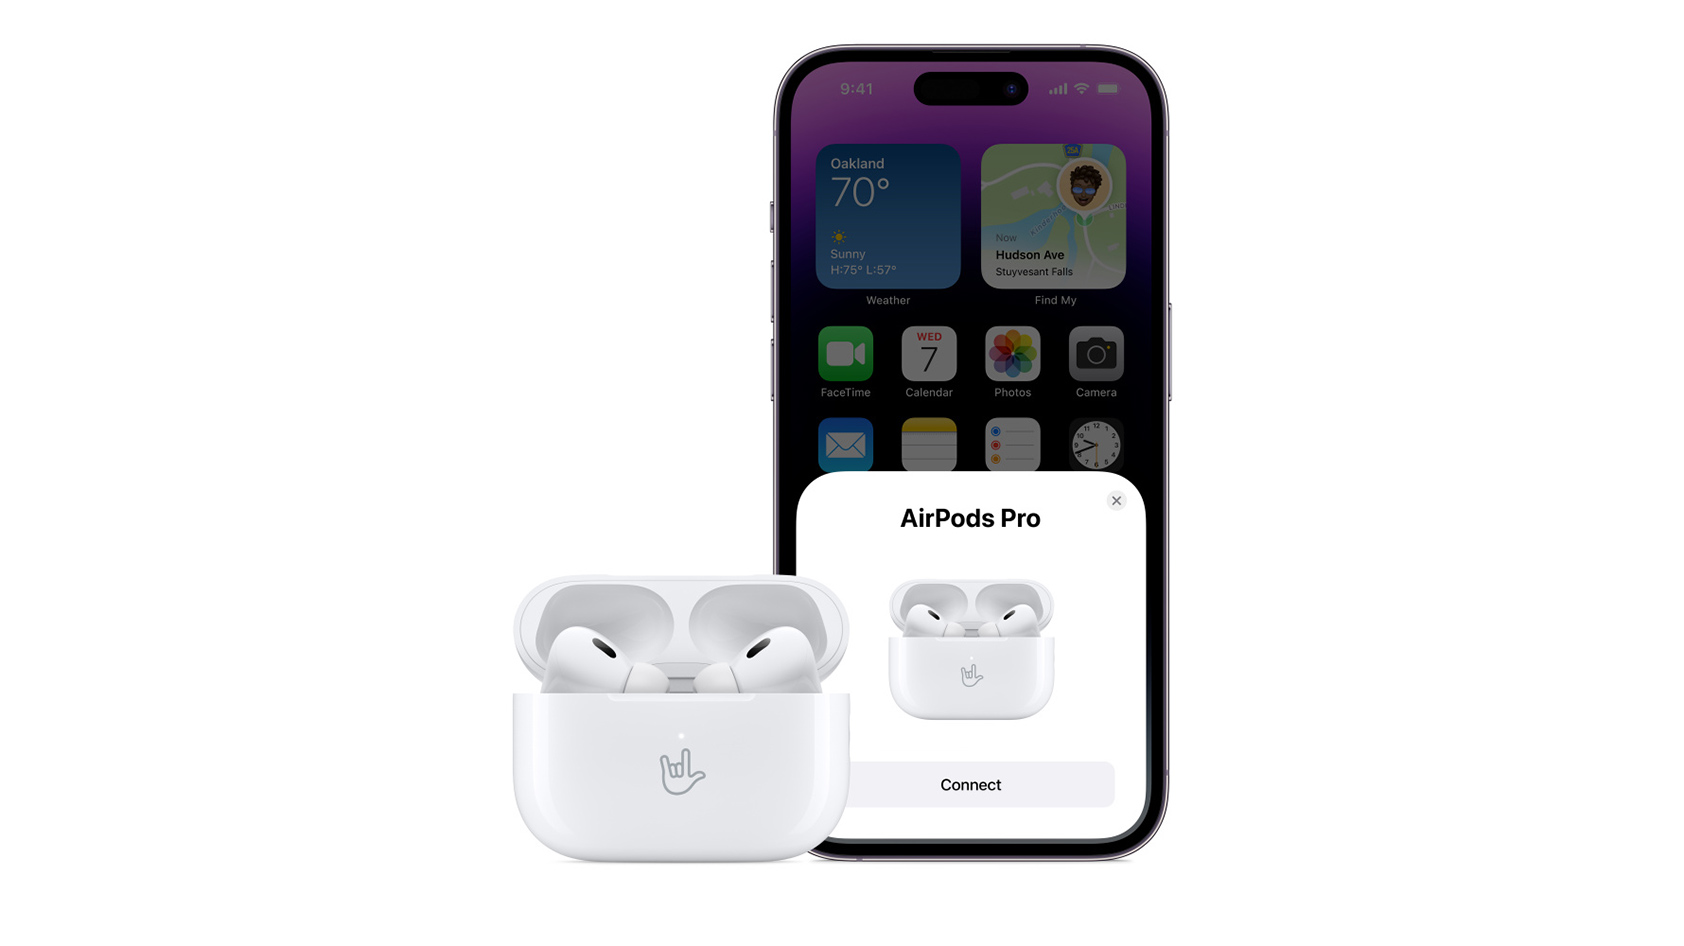 The Apple AirPods Pro (2nd generation) with the engraved case standing in front of an iPhone 14.